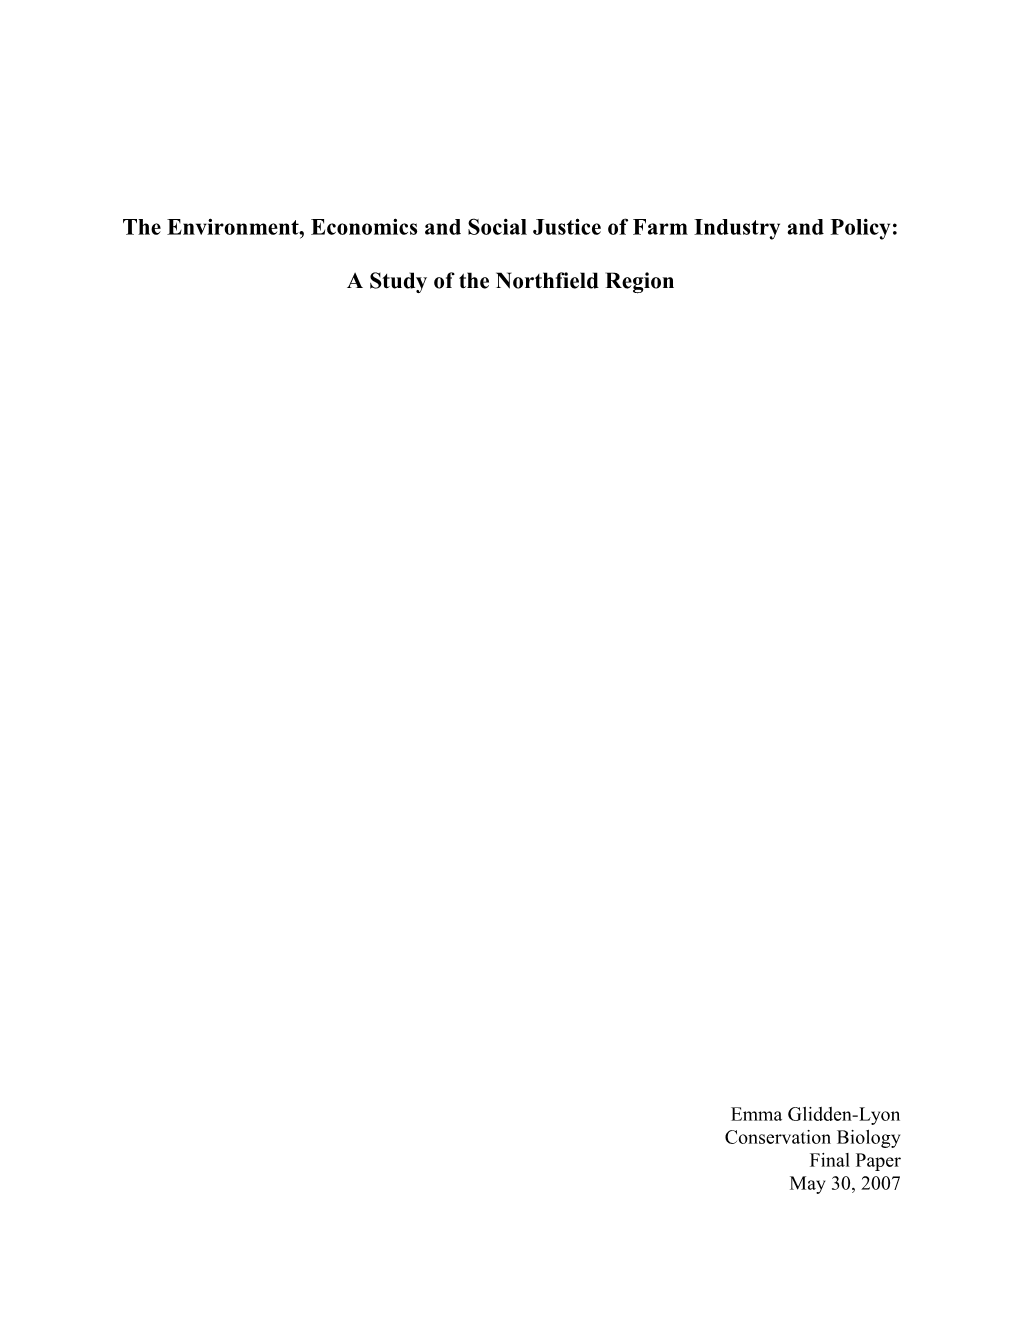 The Environment, Economics and Social Justice of Farm Industry and Policy